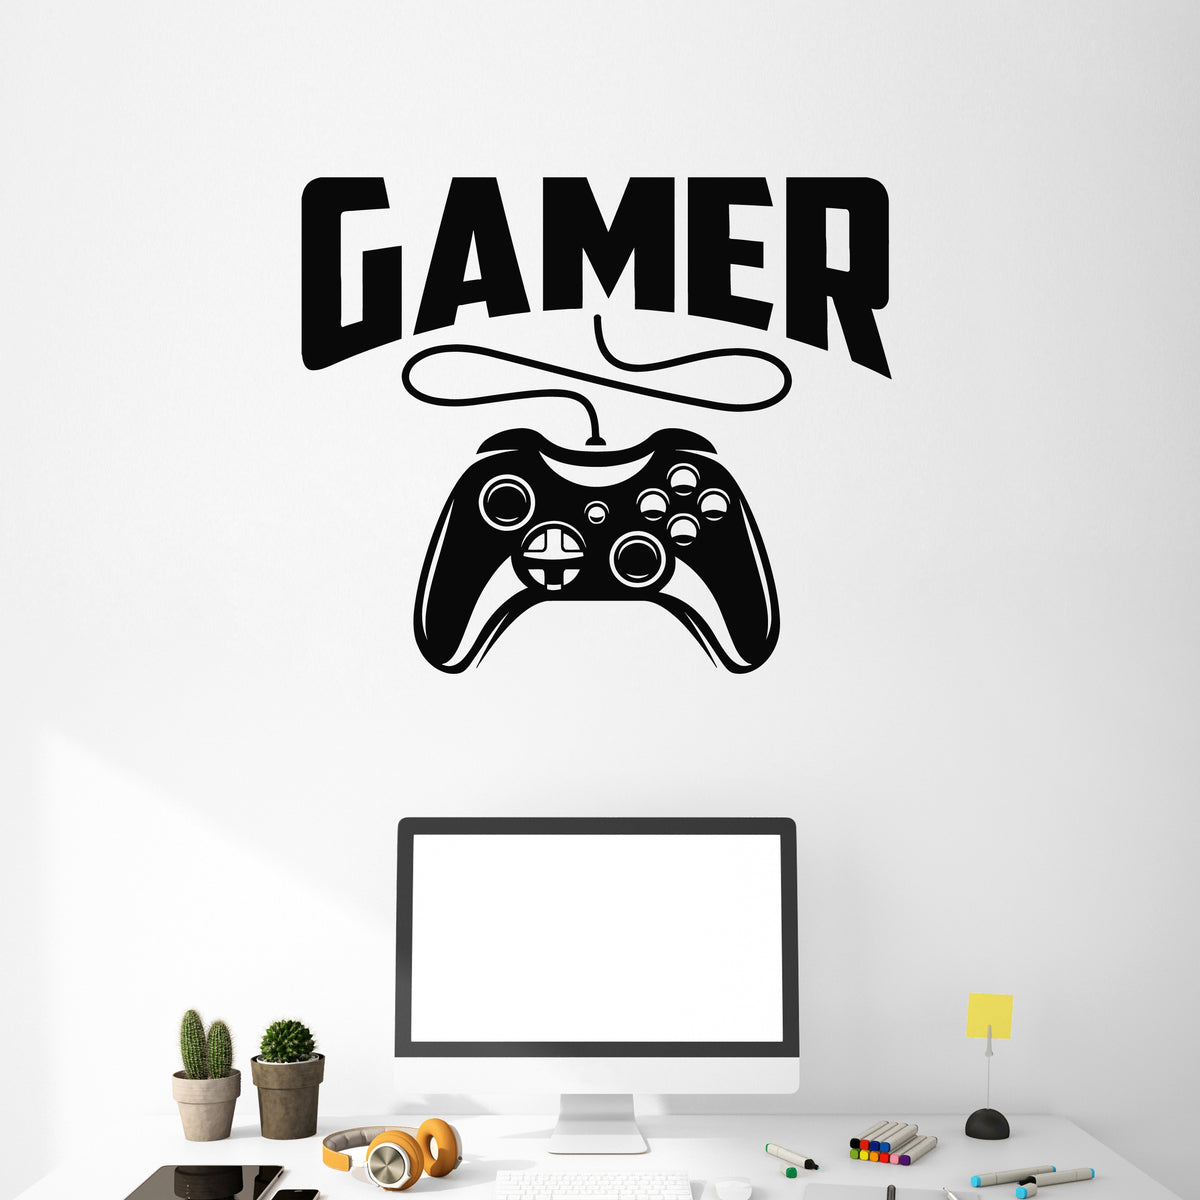 Gamer Sticker, Video Game, Computer Game, Game Play, Wall St